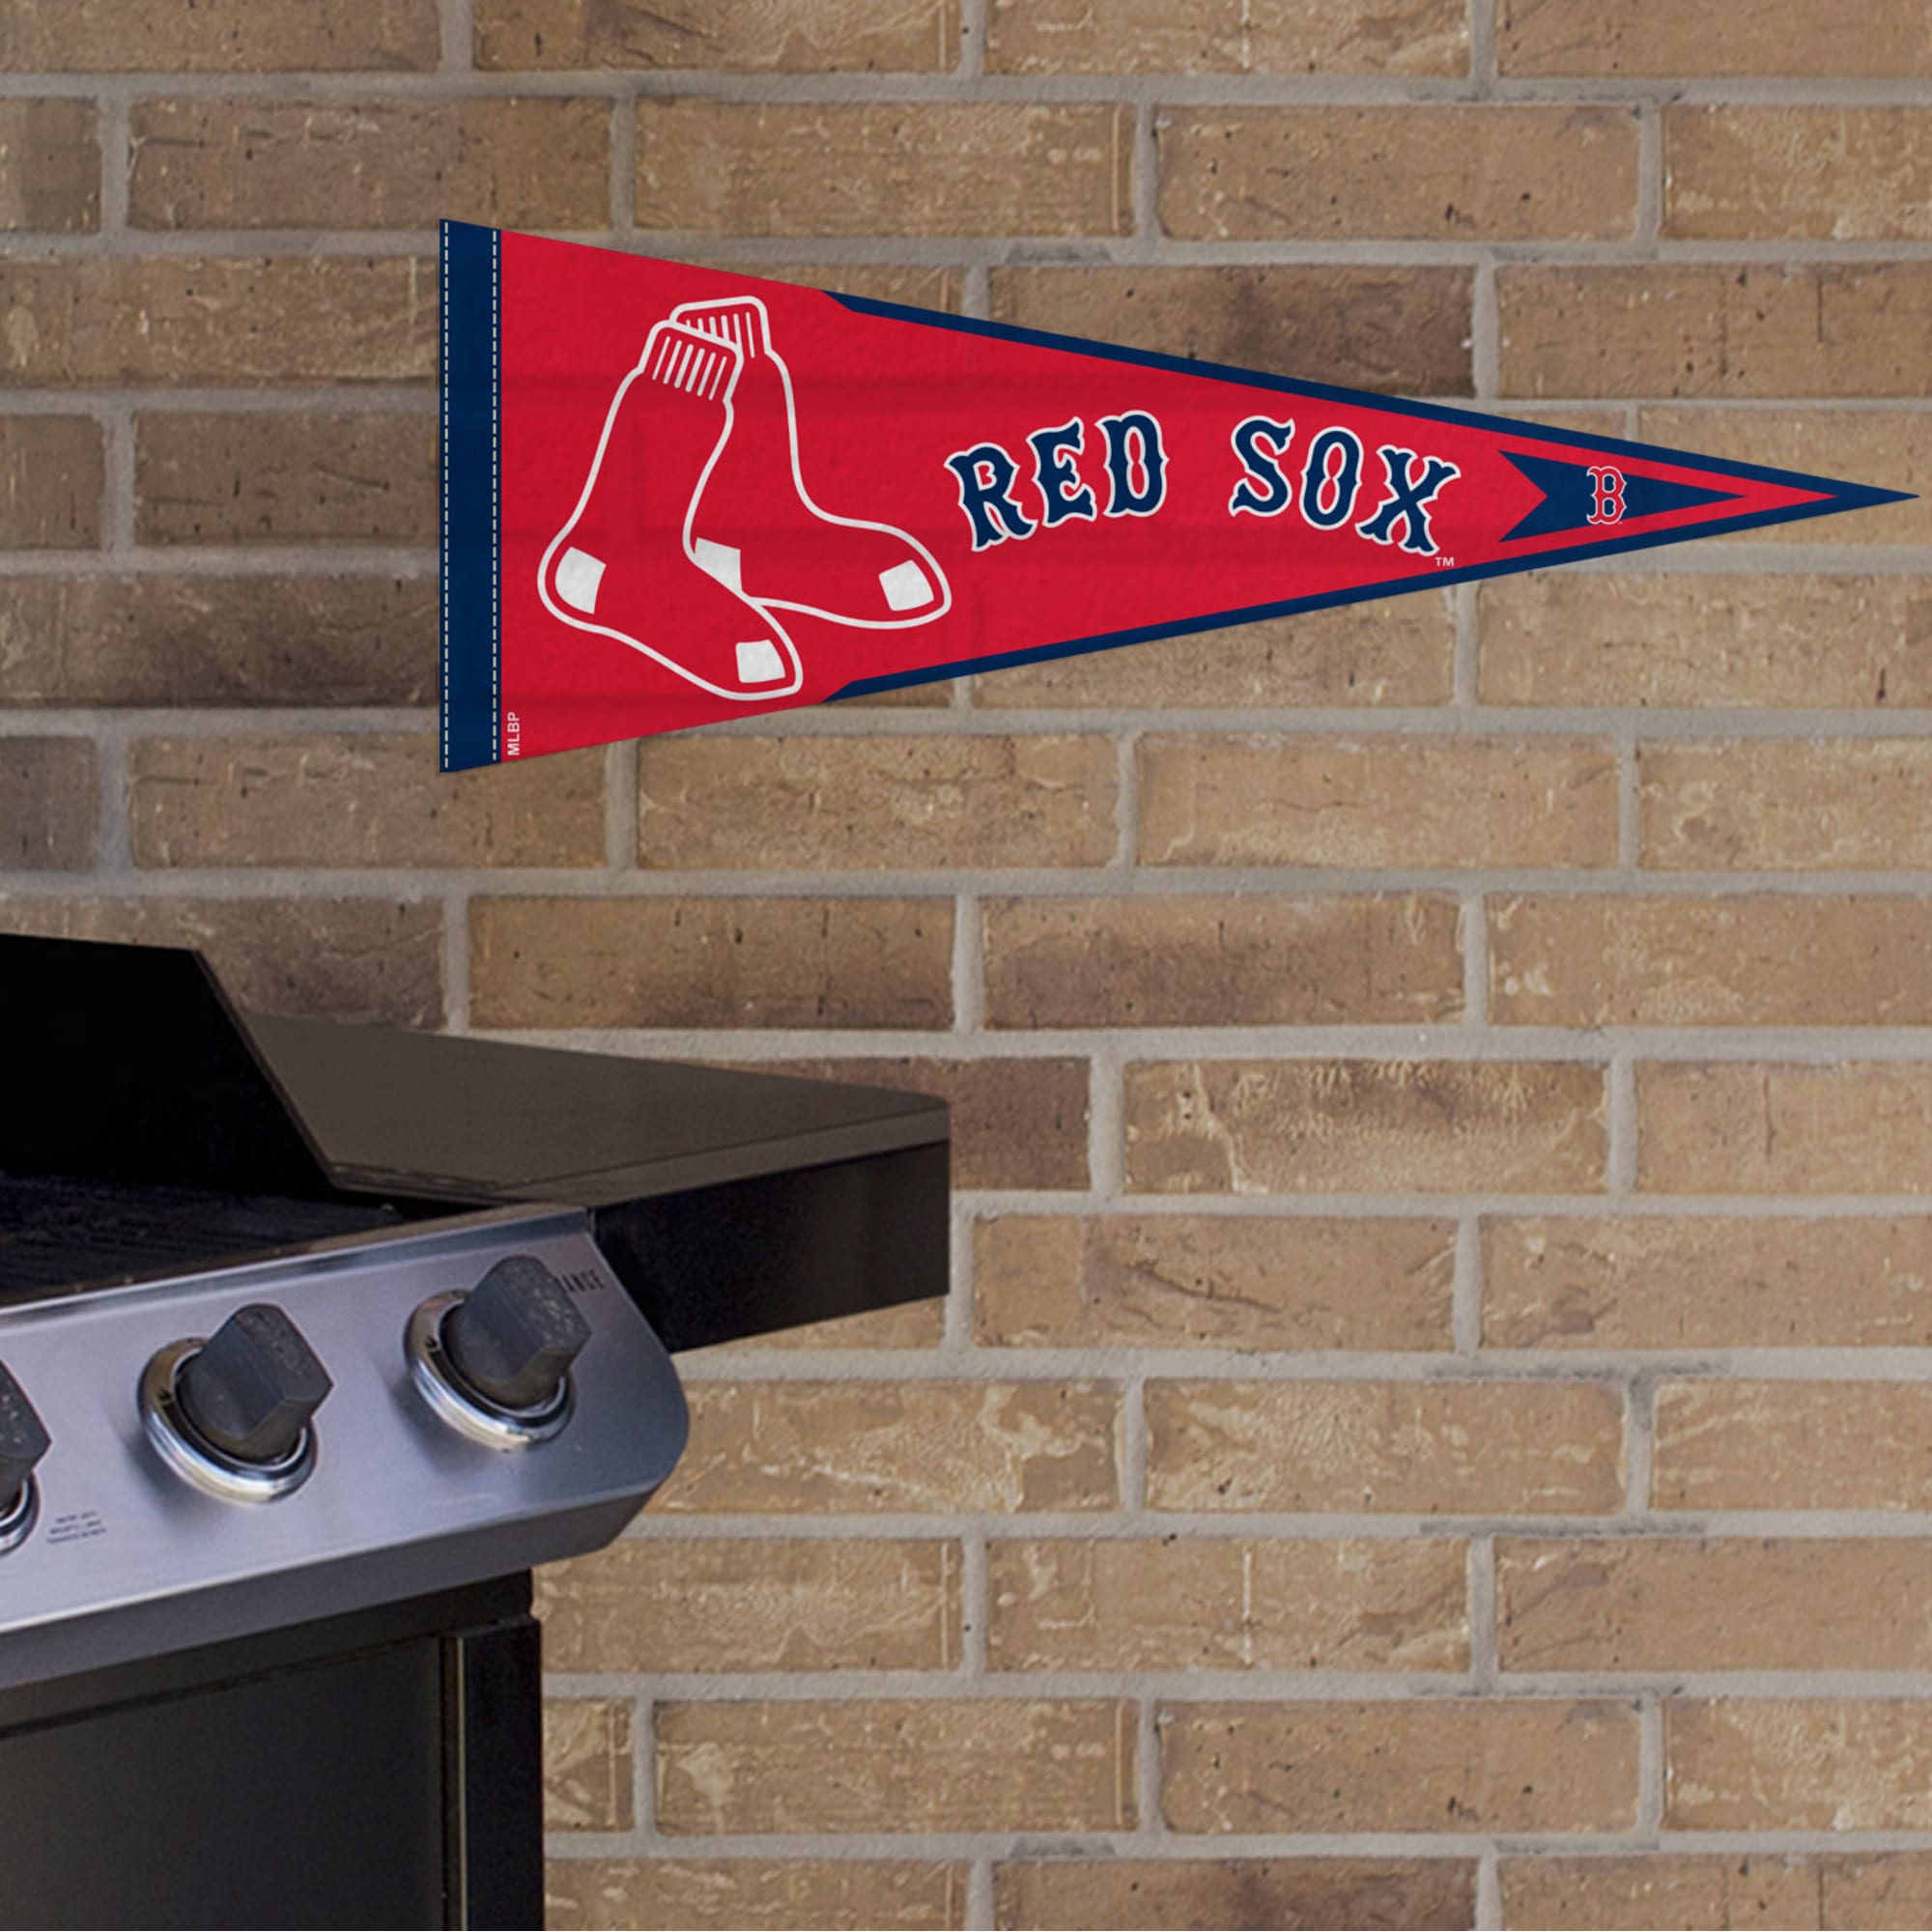 Boston Red Sox: Pennant - Officially Licensed MLB Outdoor Graphic 24.0"W x 9.0"H by Fathead | Wood/Aluminum